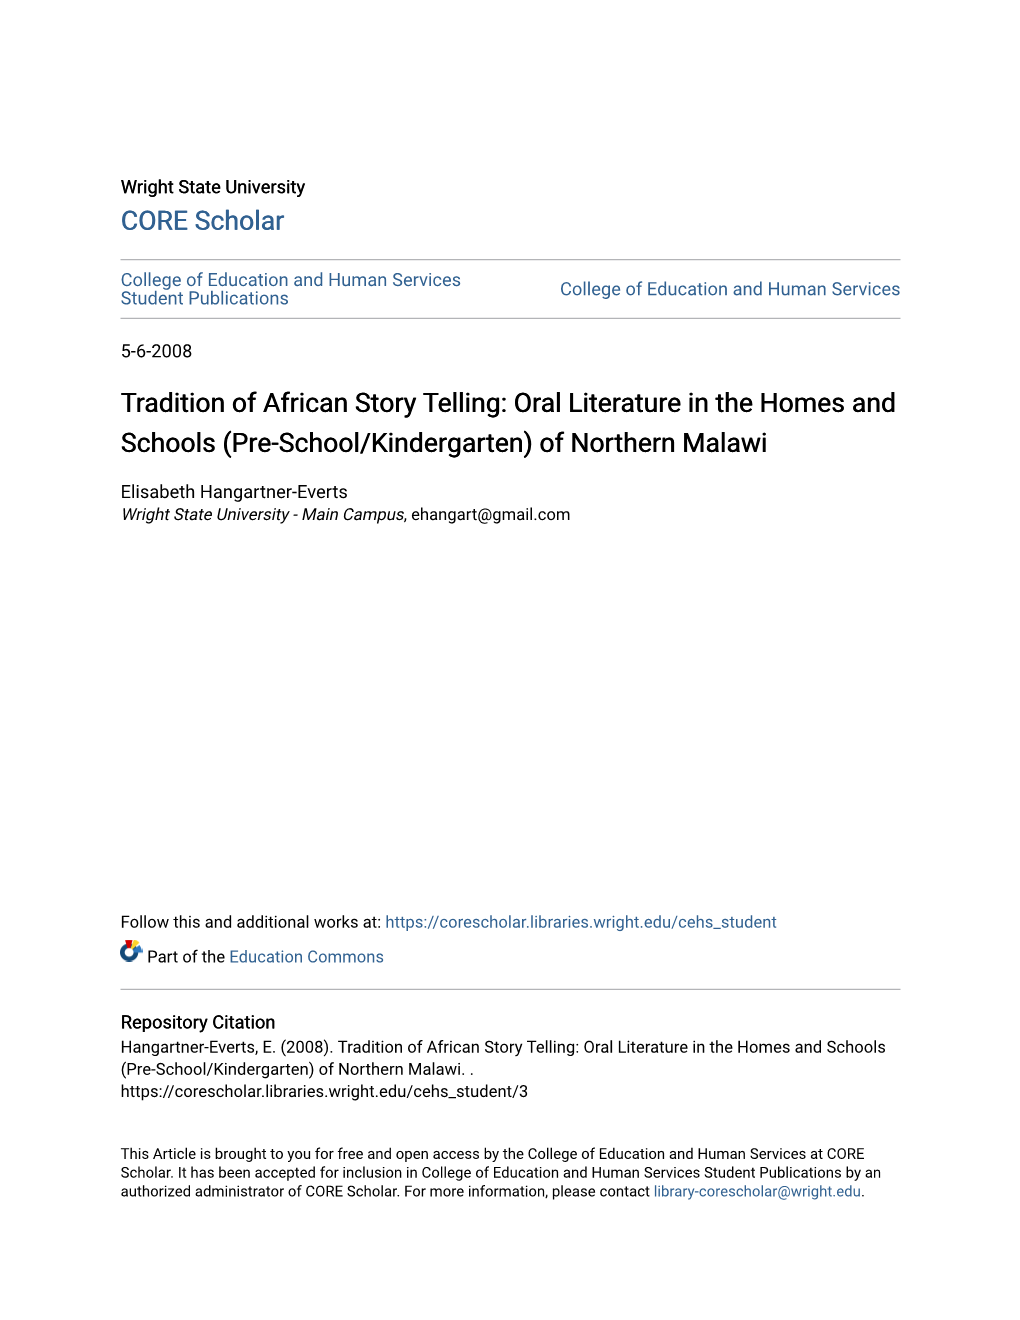 Tradition of African Story Telling: Oral Literature in the Homes and Schools (Pre-School/Kindergarten) of Northern Malawi